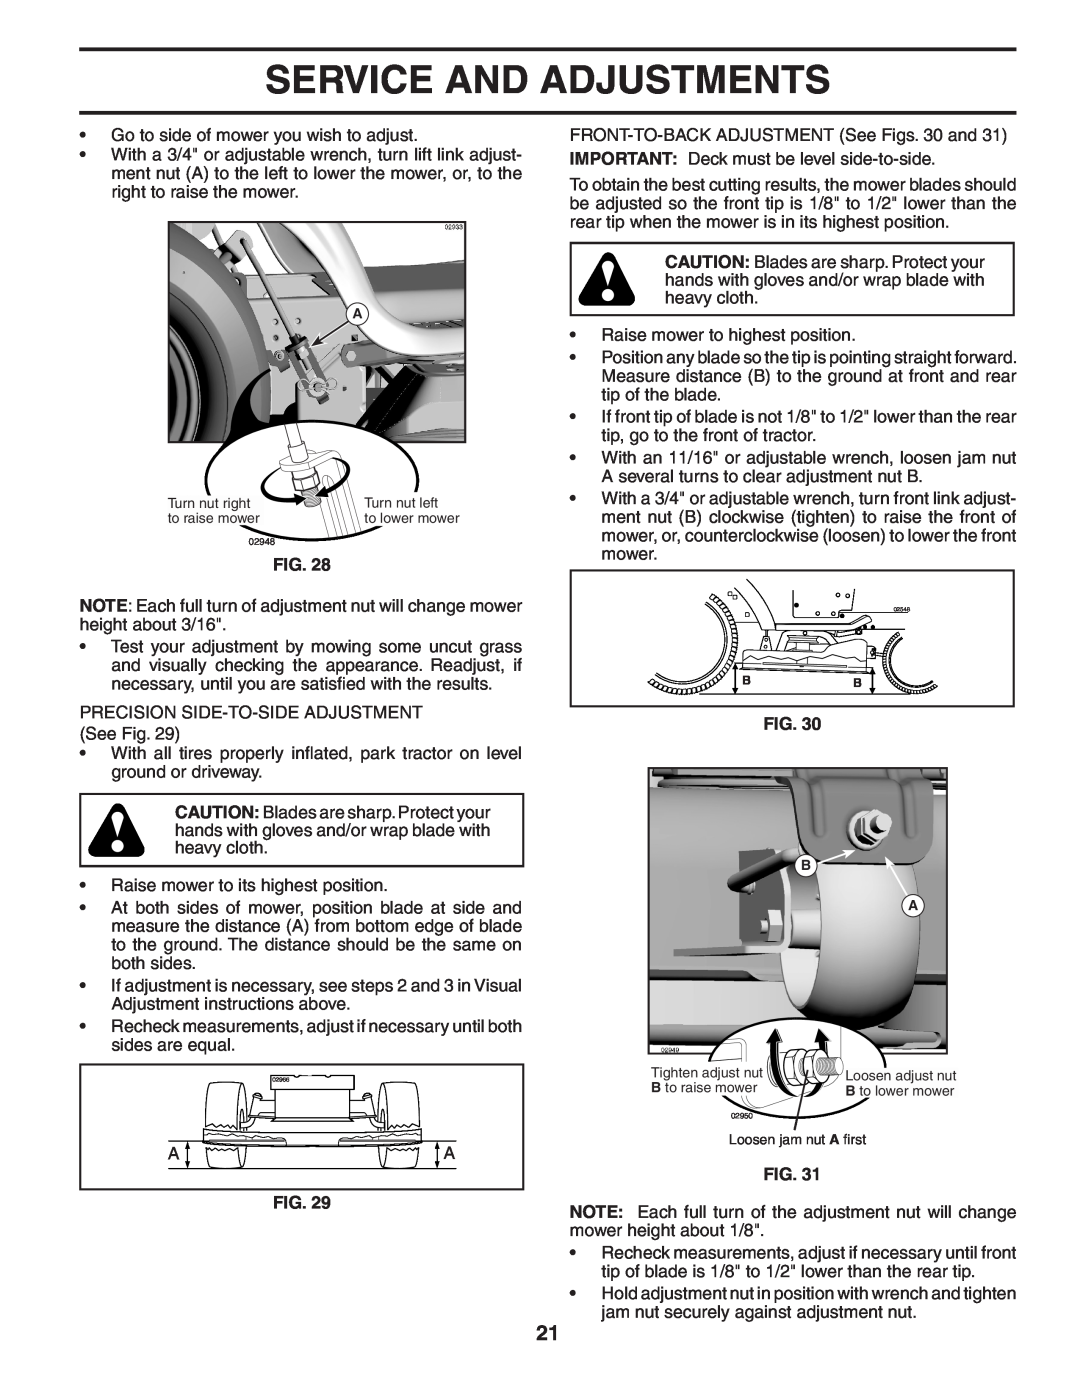 Poulan PB22H54YT manual Service And Adjustments, Turn nut right, Turn nut left, to raise mower, Tighten adjust nut 